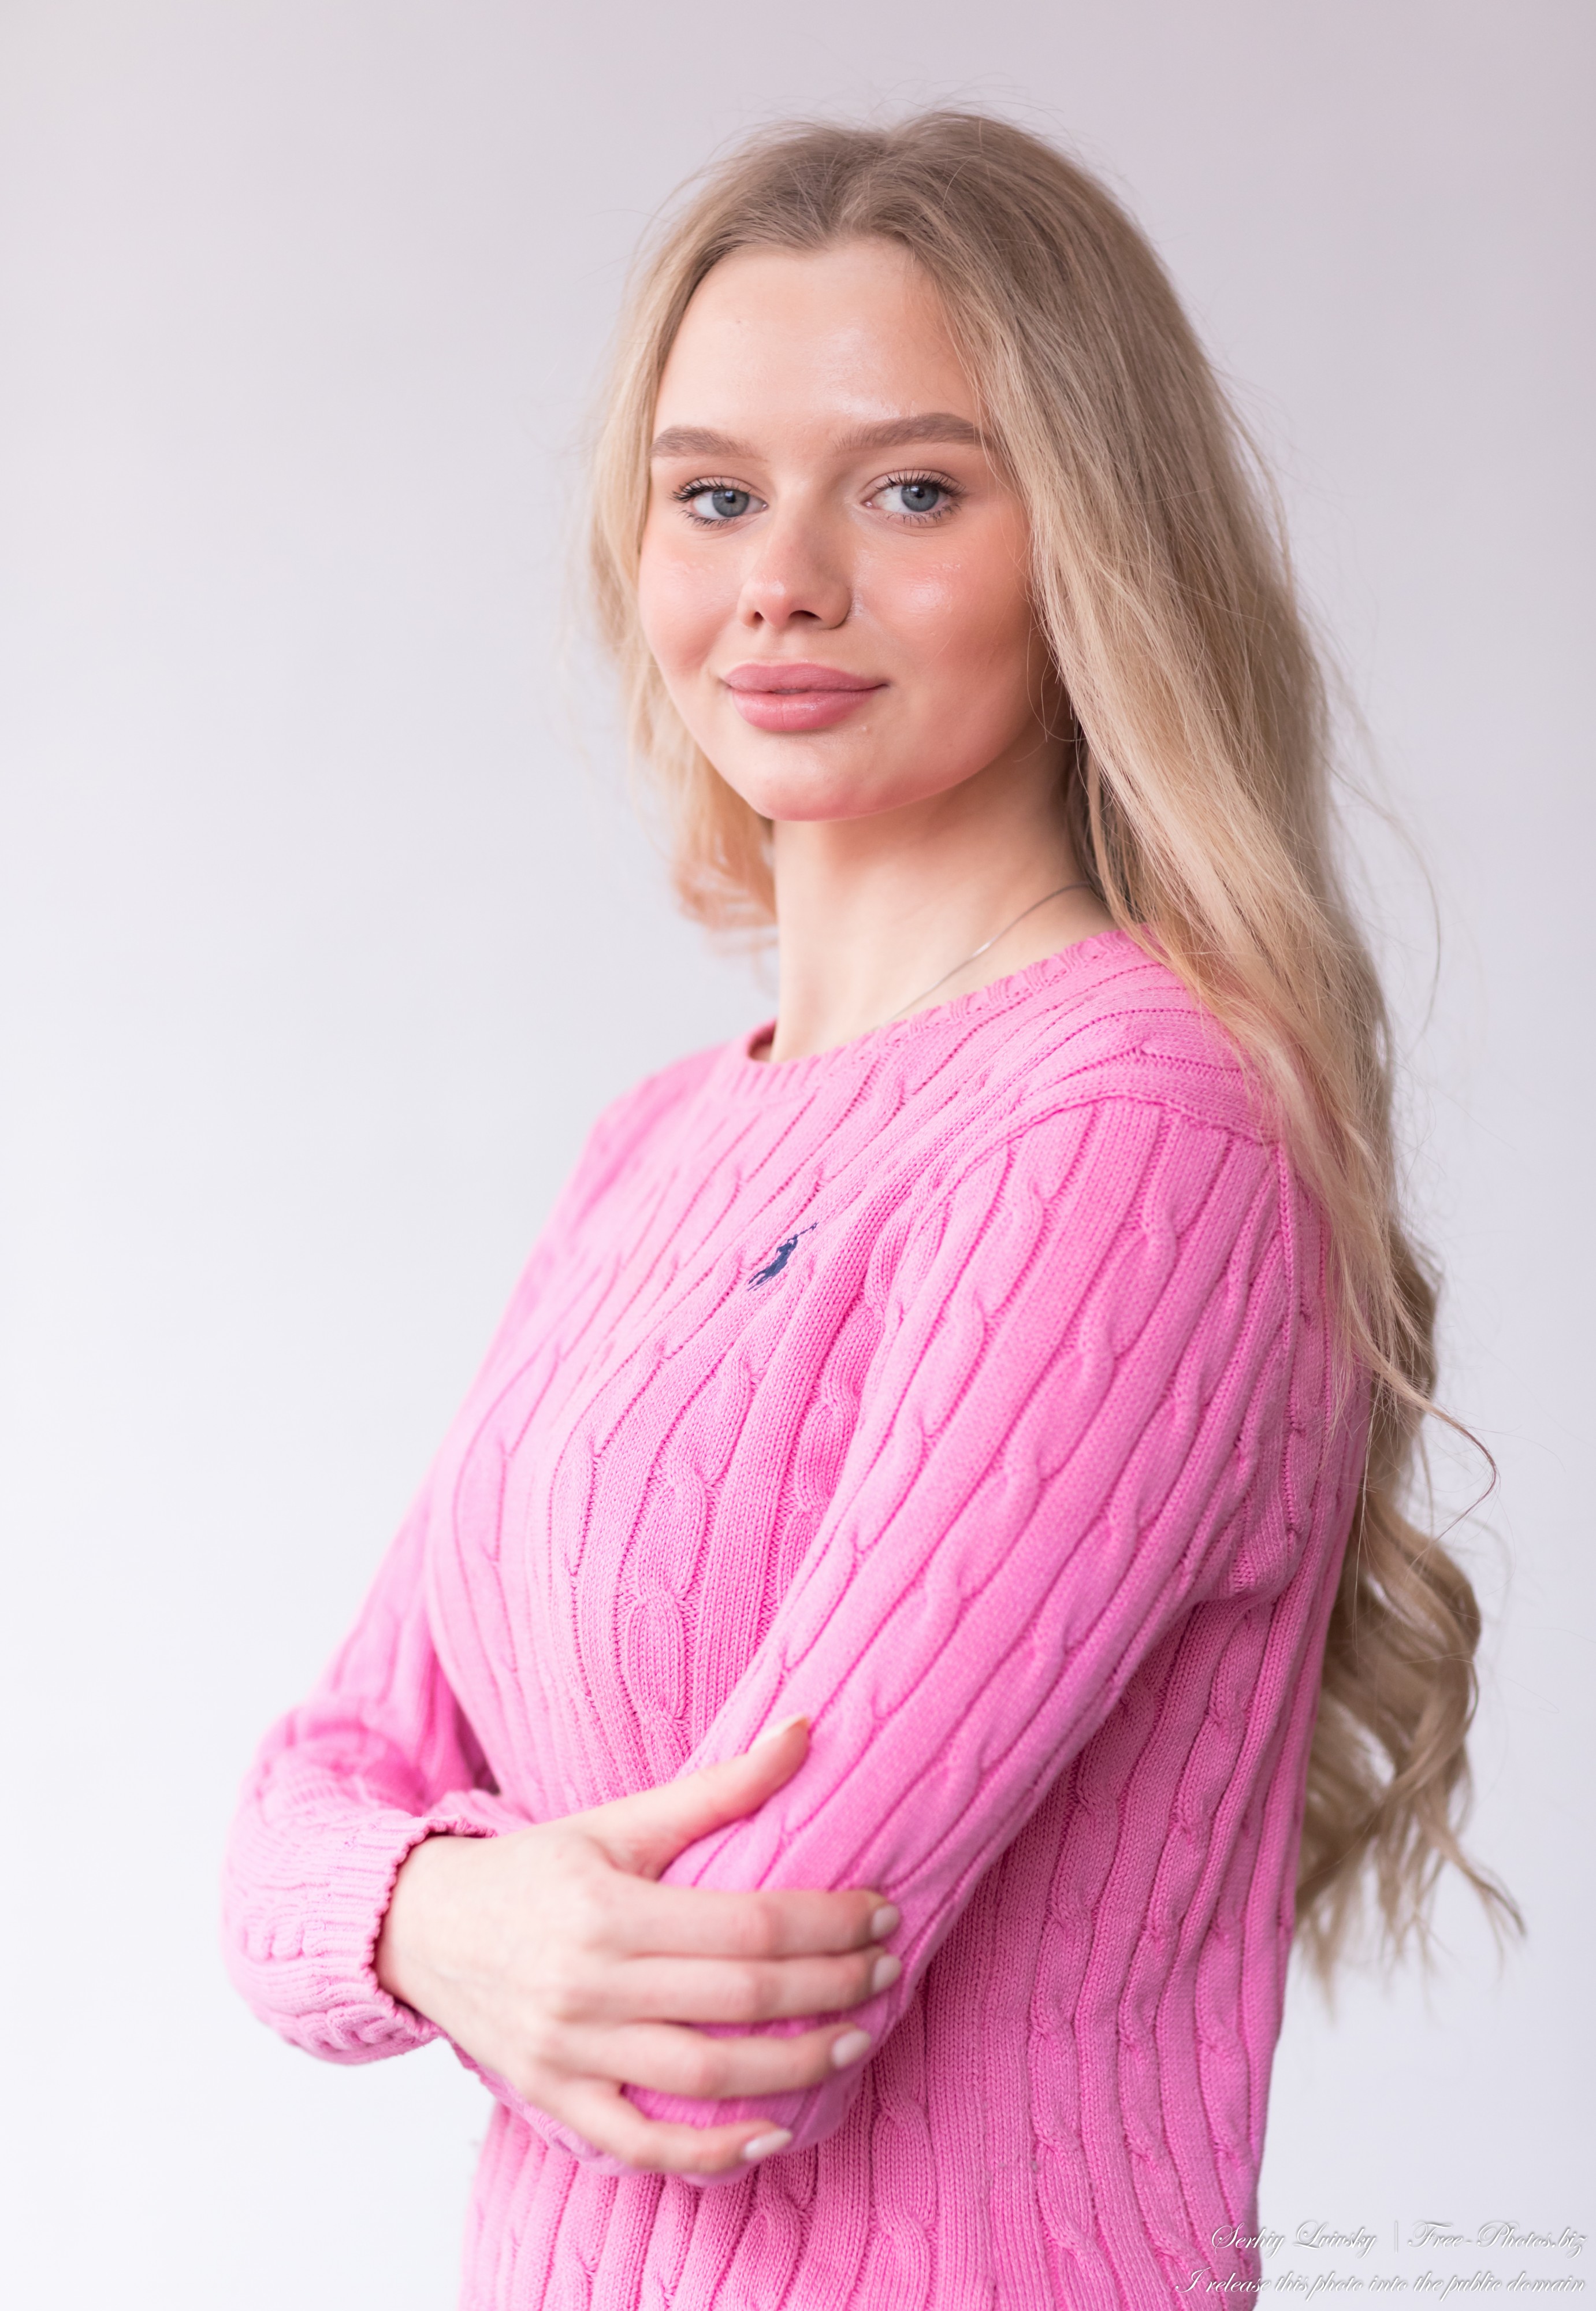 Photo Of Oksana A 19 Year Old Natural Blonde Girl Photographed By Serhiy Lvivsky In March 2021